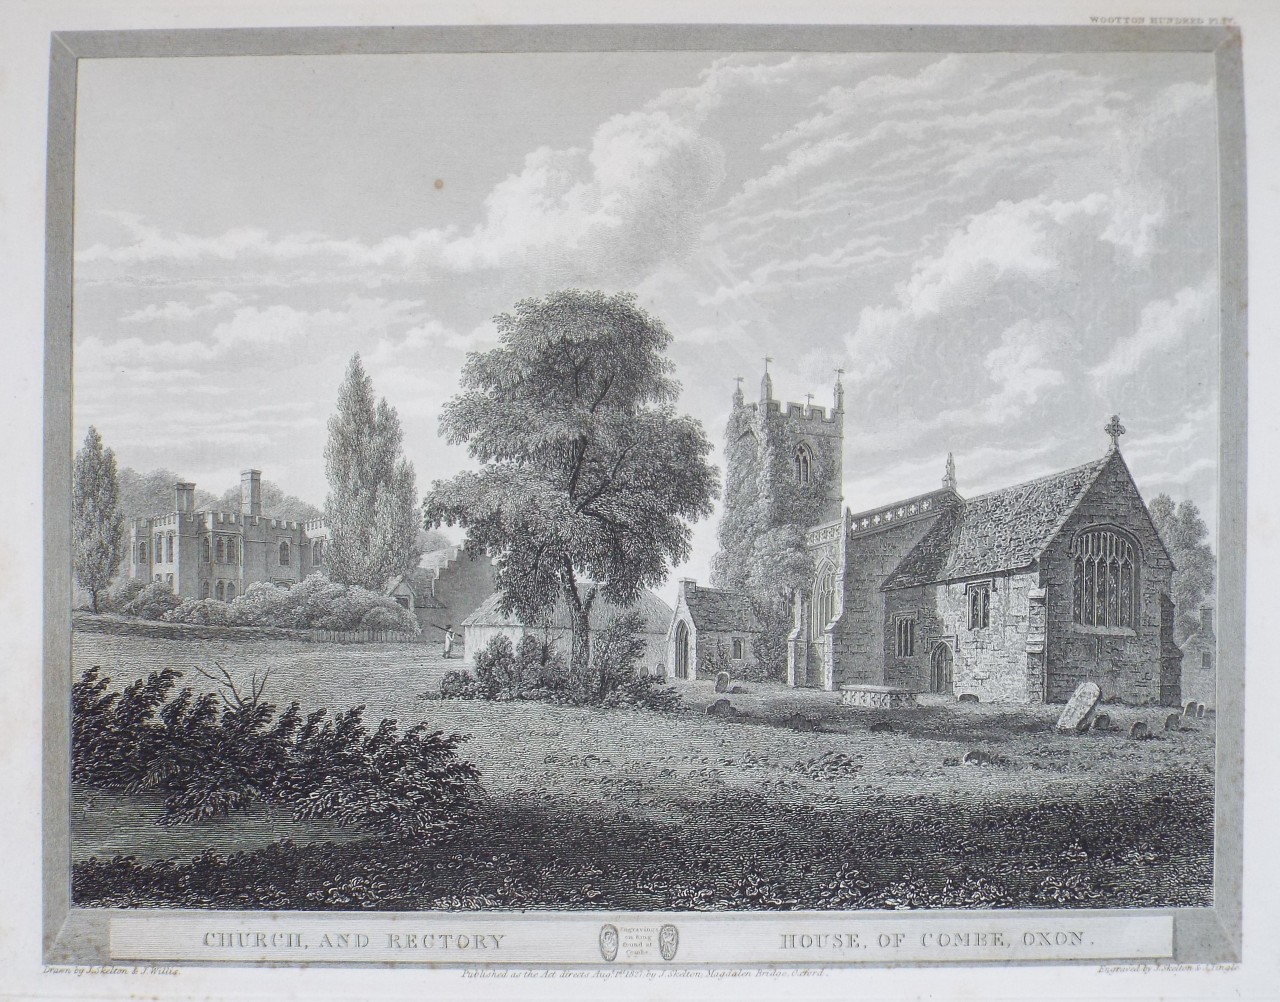 Print - Church and Rectory House of Combe, Oxon. - Skelton